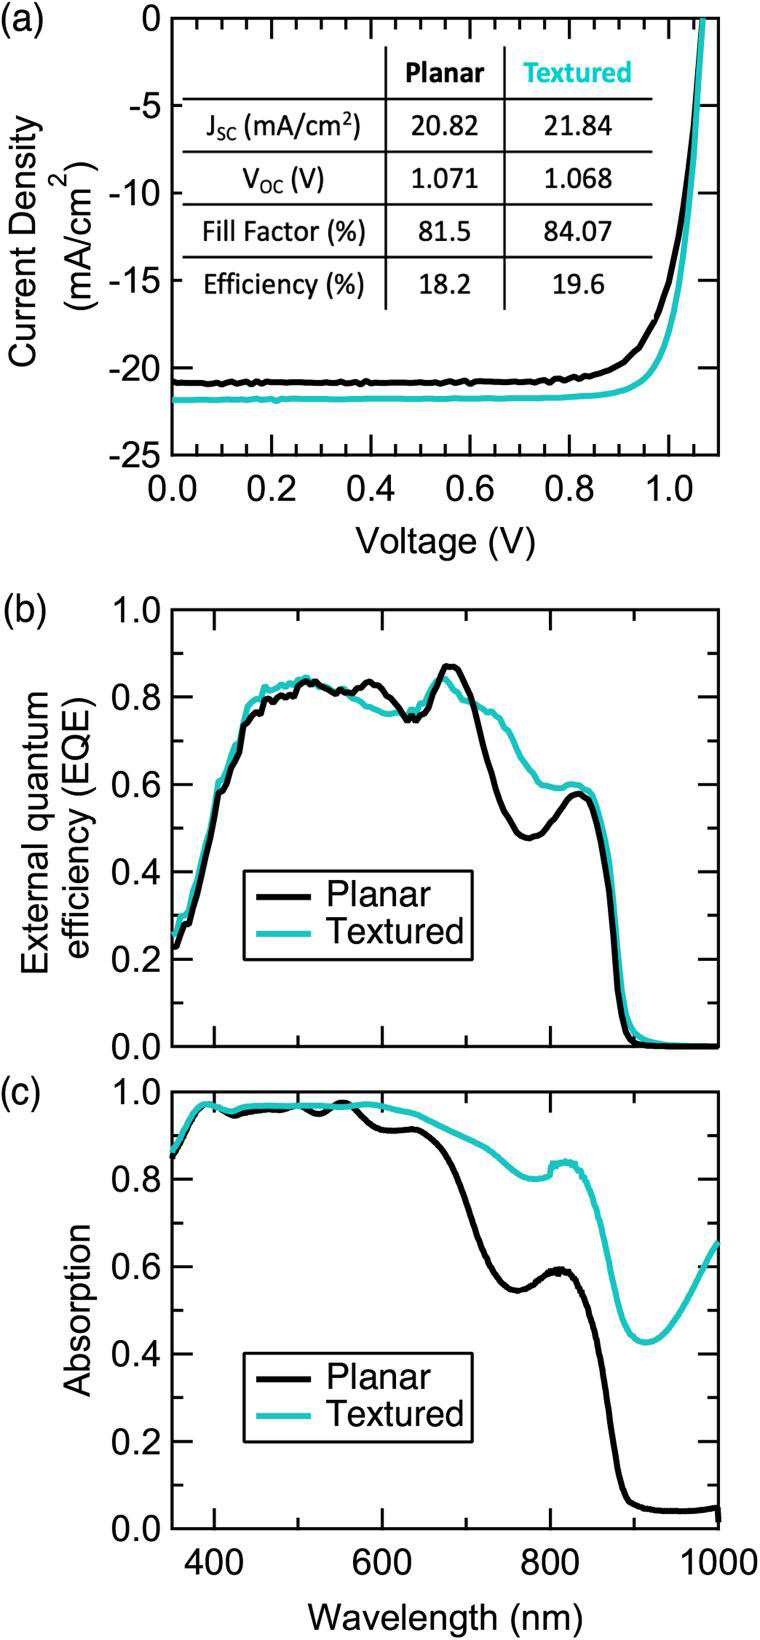 Figure 2: Cell measurements of thin solar cells without texturing (black) and textured (blue): (a) current density versus voltage; (b) external quantum efficiency; (c) absorption.